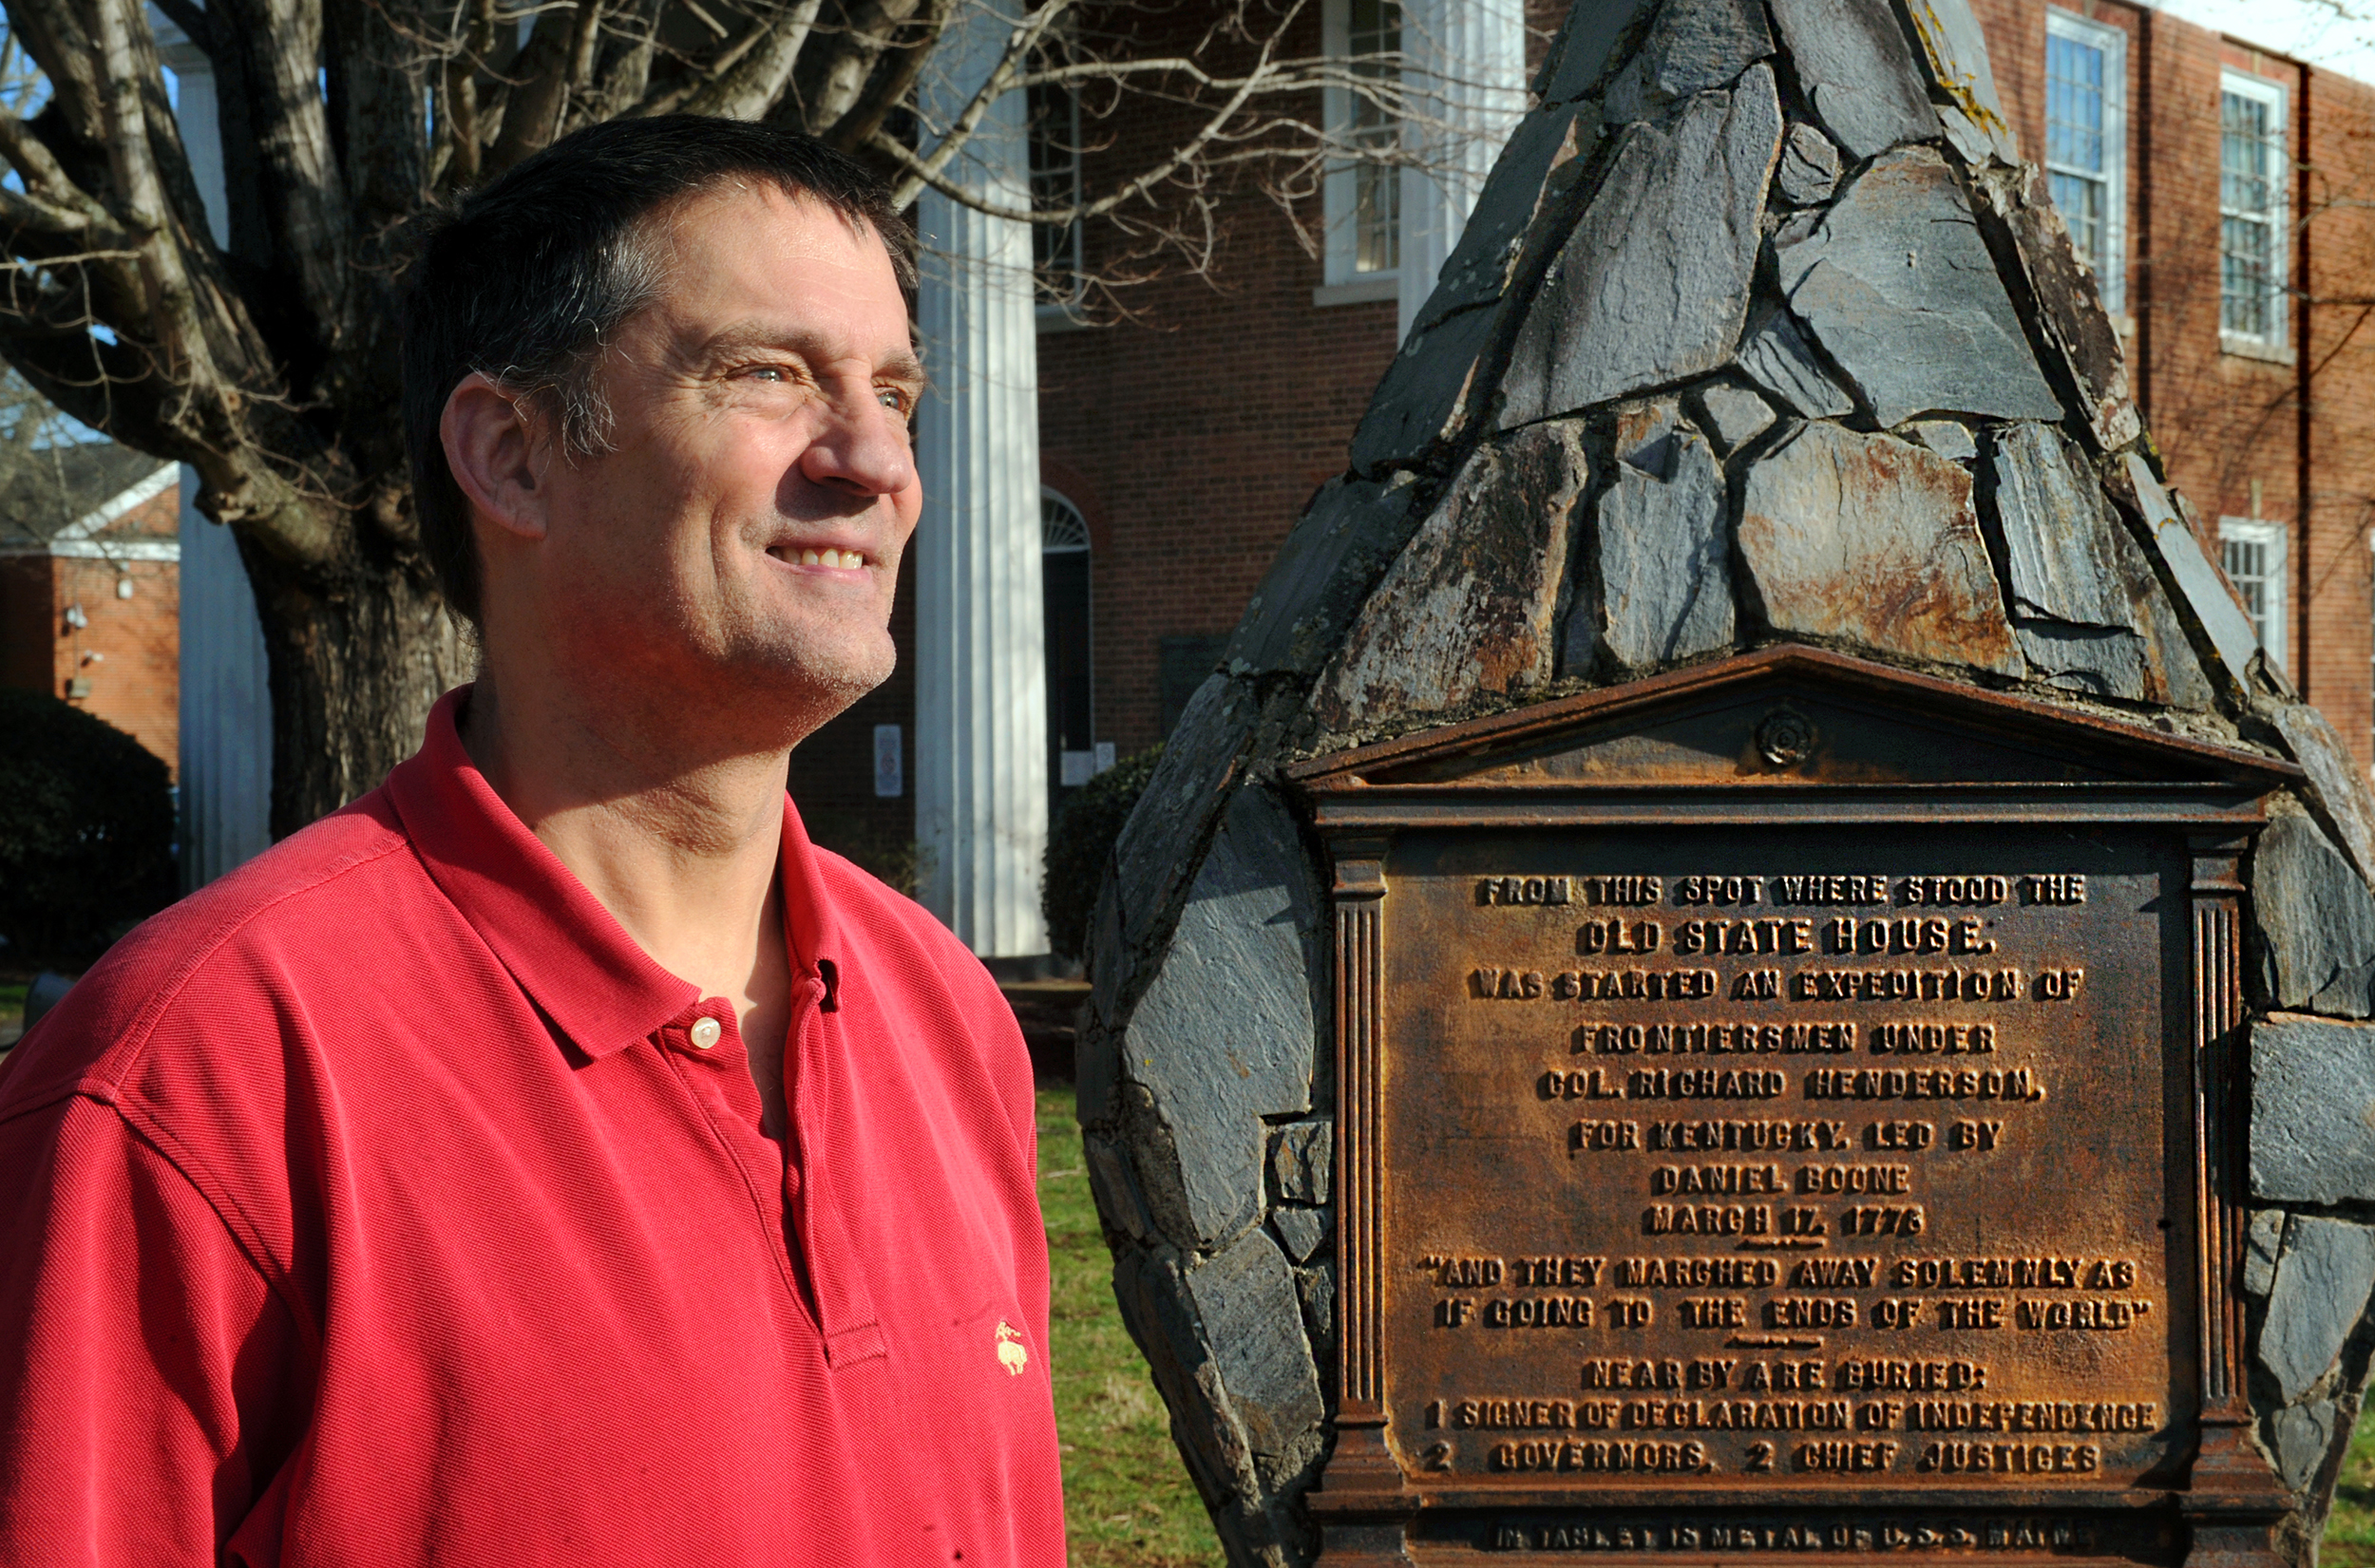 Fitz Brundage, wearing a red shirt, looks off to the right as he stands beside a monument in downtown Hillsborough.